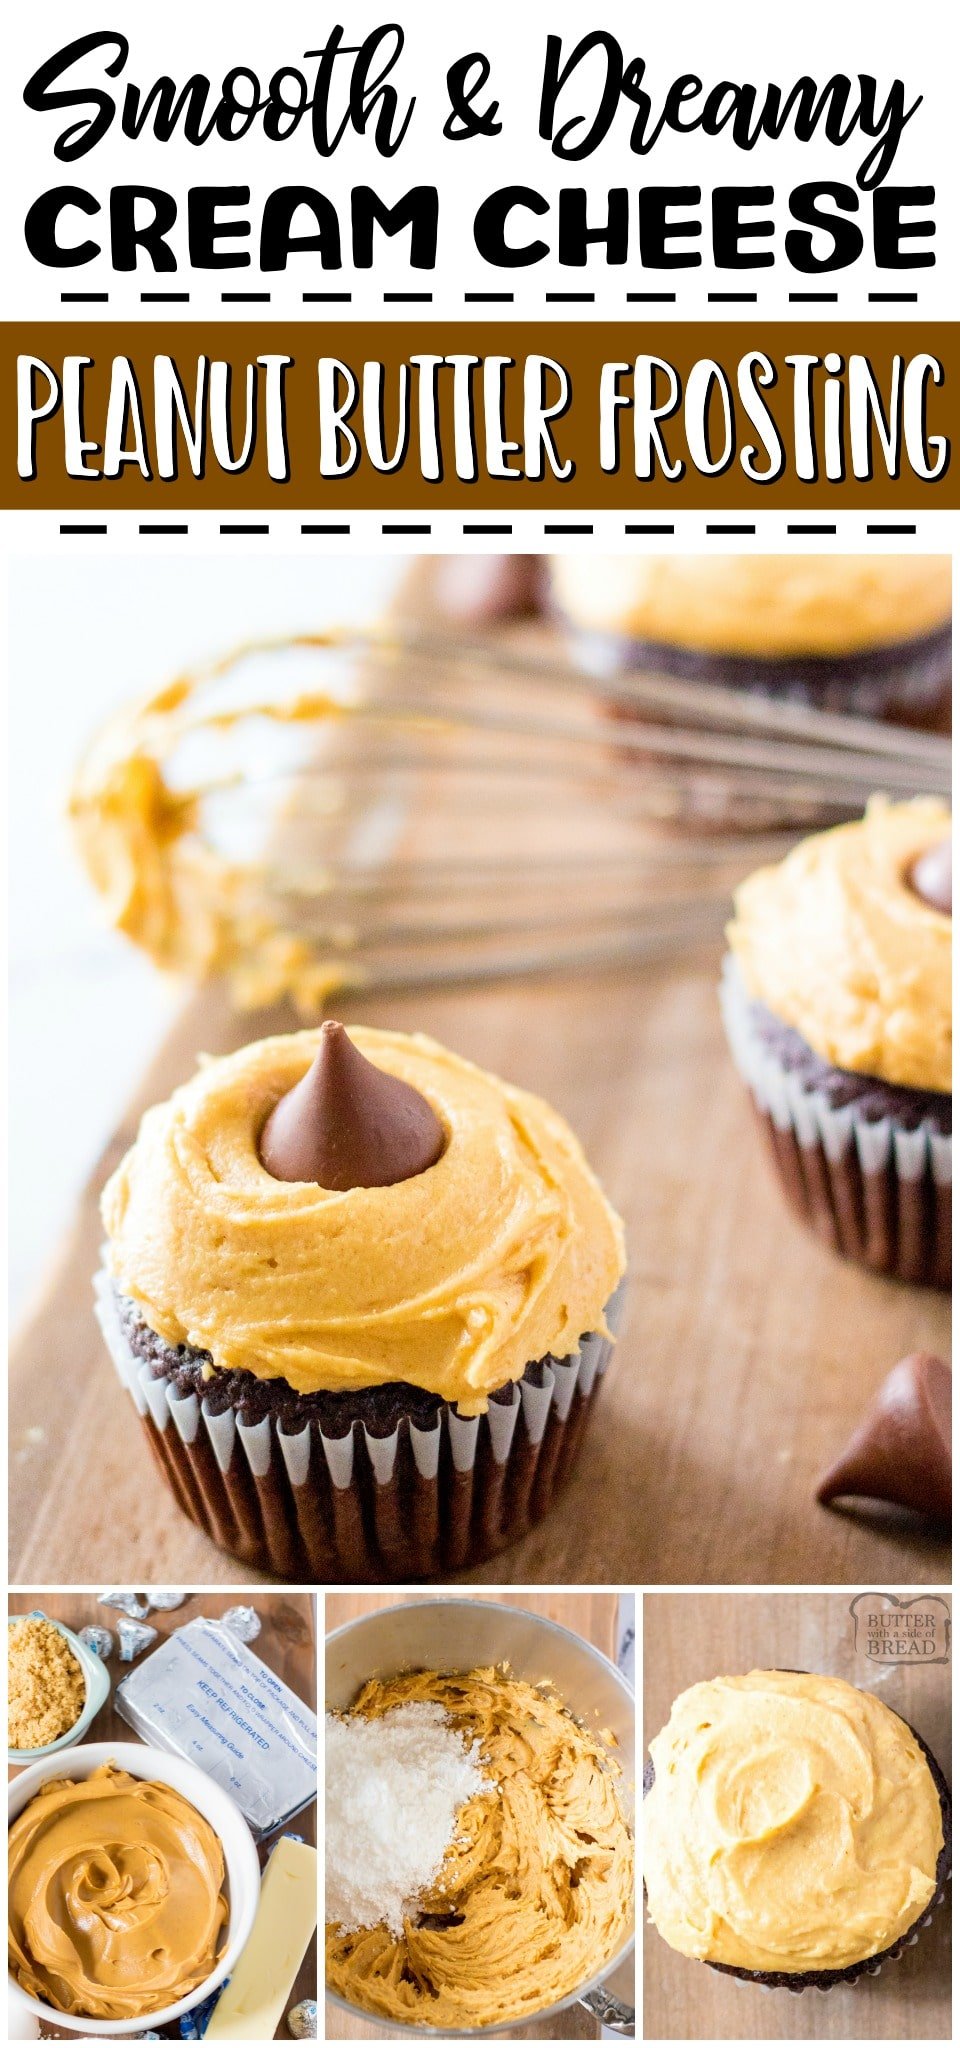 Peanut butter cream cheese frosting is a salty sweet, flavorful frosting recipe that you’re going to love! Cream Cheese & peanut butter combine for a deliciously fluffy, smooth peanut butter frosting that is perfect on cupcakes, cakes, cookies & more! 